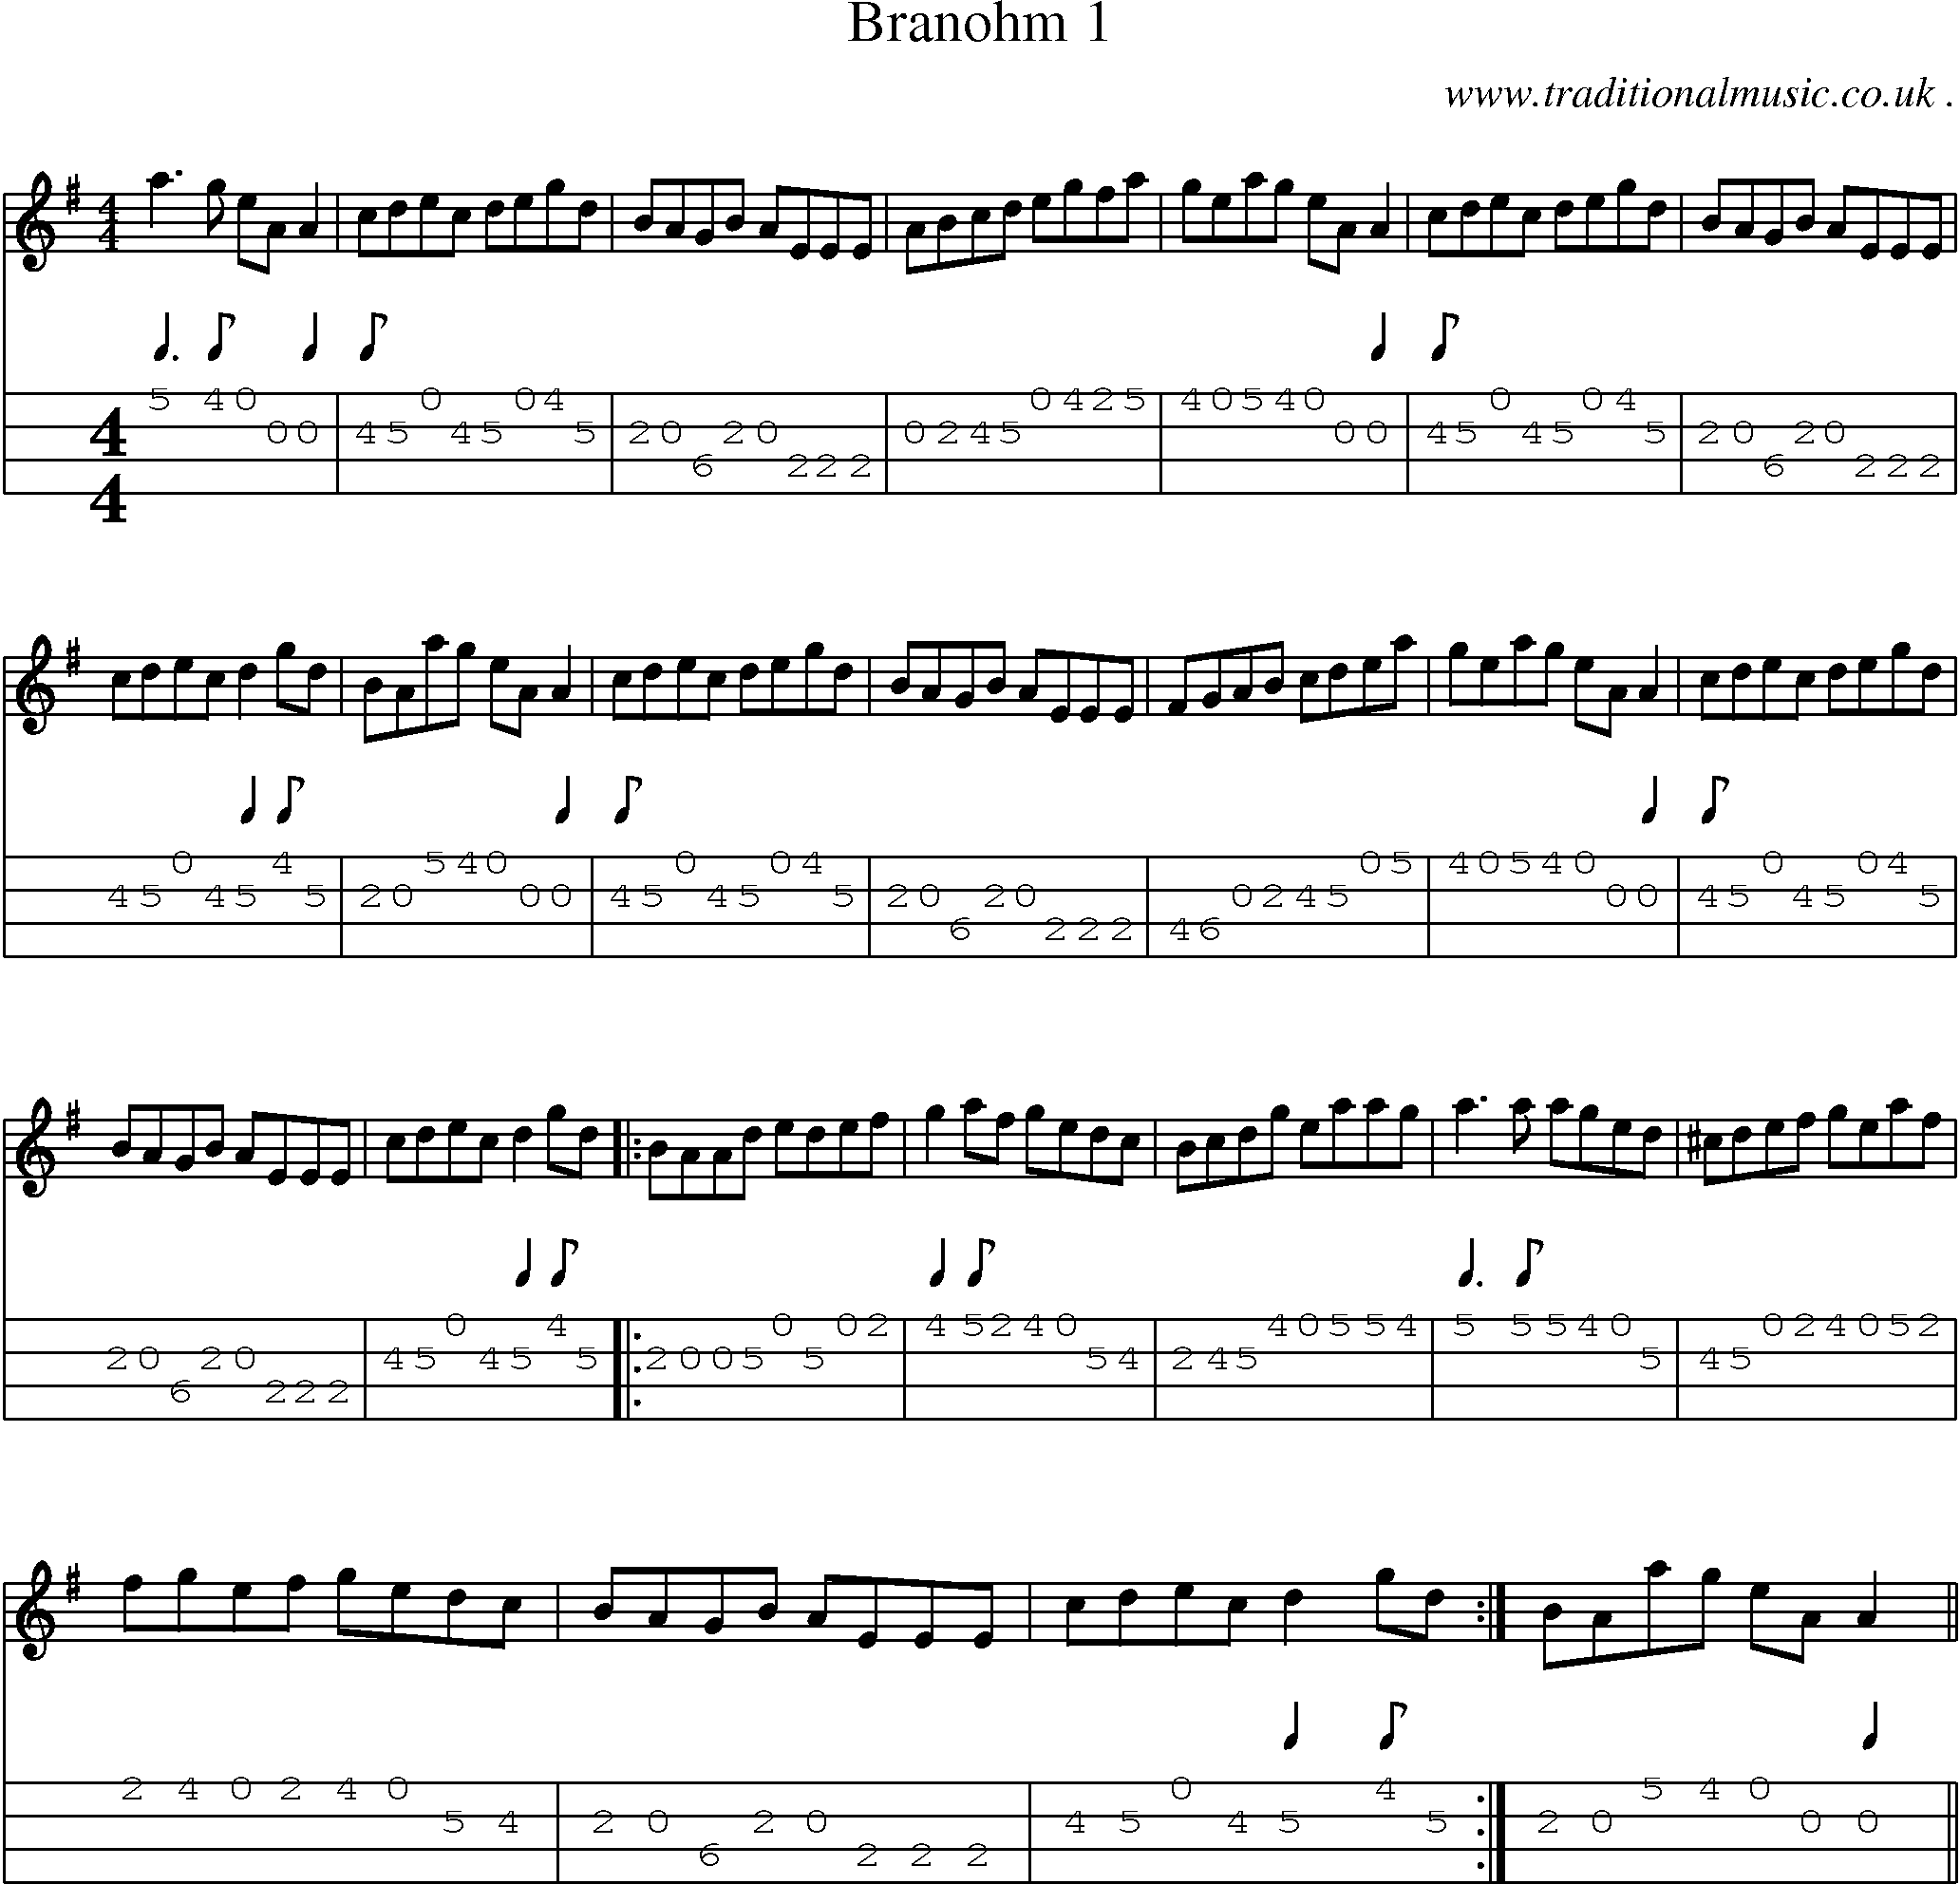 Sheet-Music and Mandolin Tabs for Branohm 1